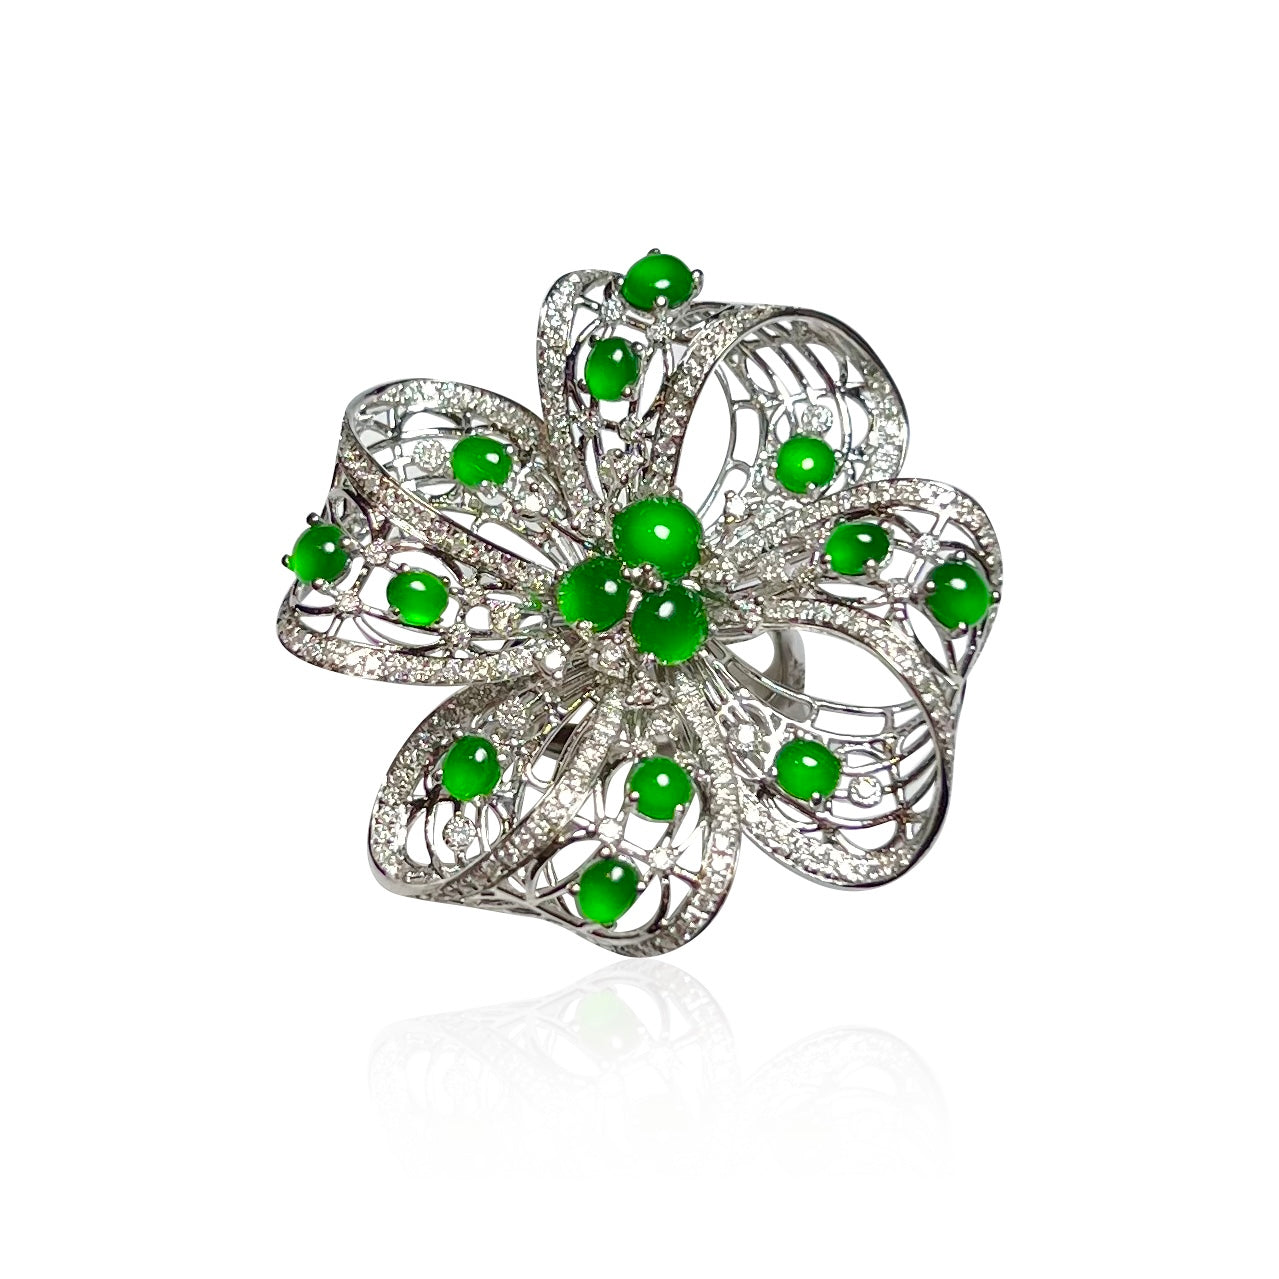 18K WHITE GOLD LACE RIBBON JADEITE CABOCHON RING WITH DIAMONDS